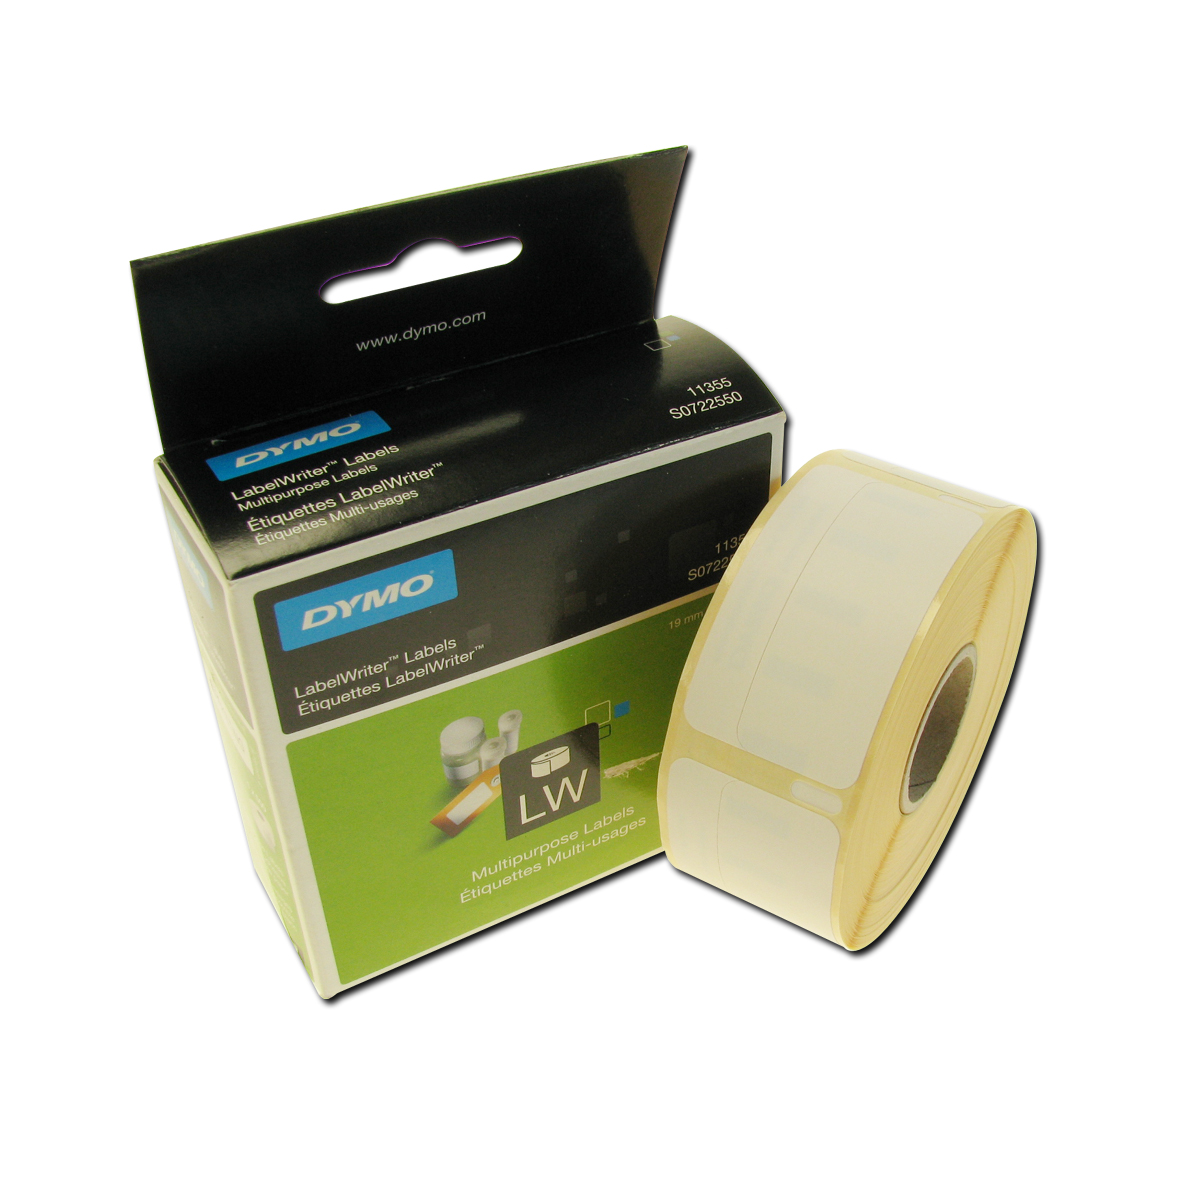 Multi-purpose labels 51x19 mm for LabelWriter Duo Dymo